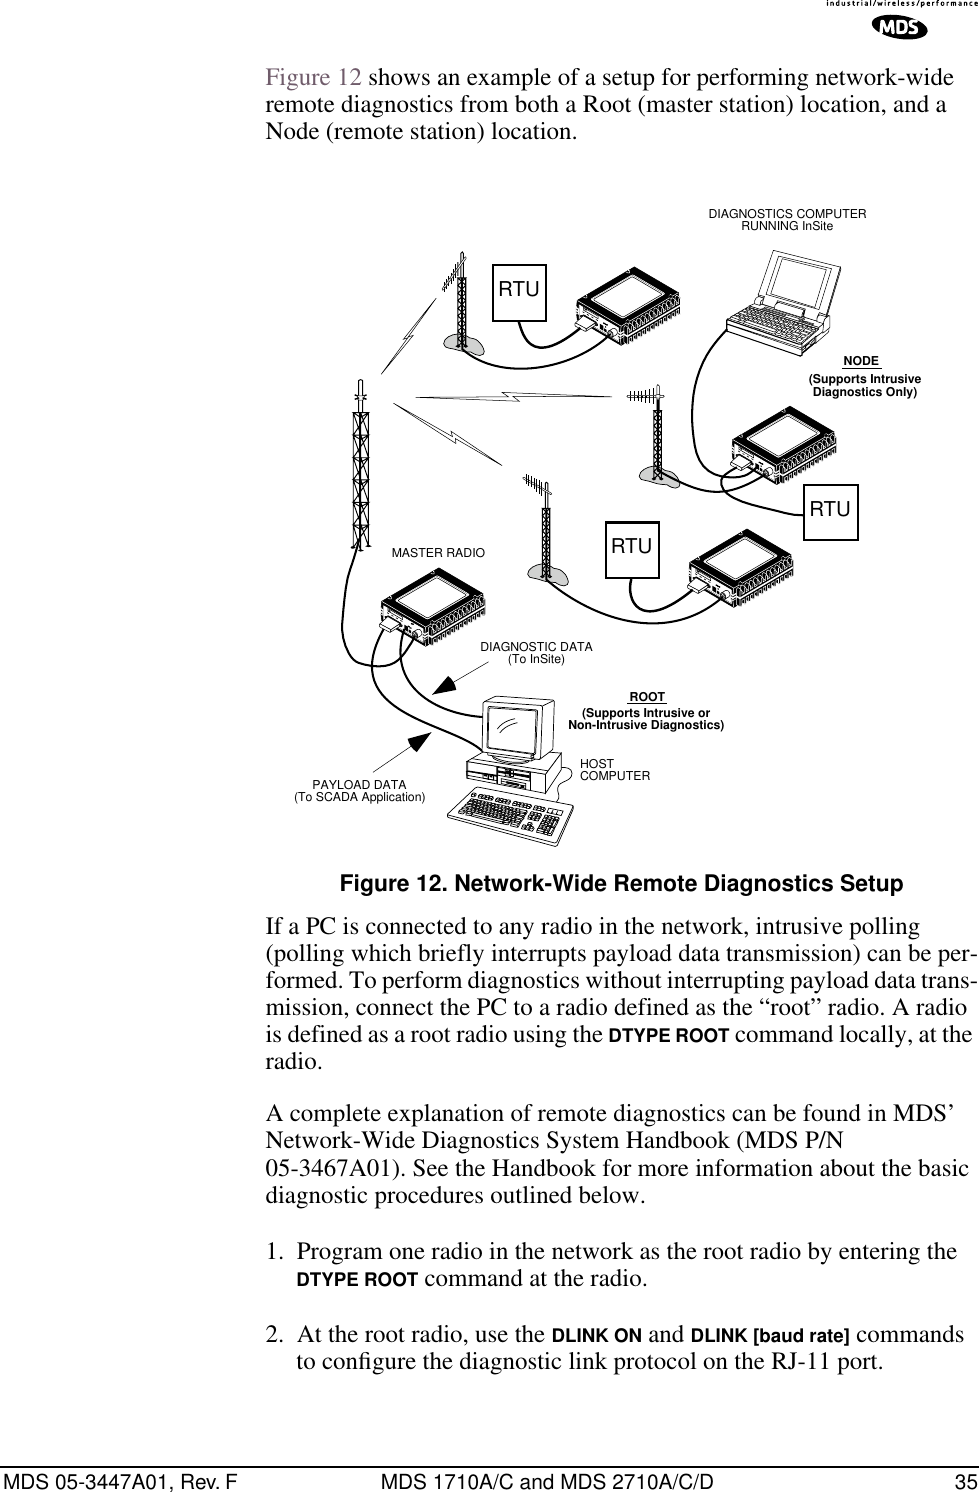 MDS 05-3447A01, Rev. F MDS 1710A/C and MDS 2710A/C/D 35Figure 12 shows an example of a setup for performing network-wide remote diagnostics from both a Root (master station) location, and a Node (remote station) location.Invisible place holderFigure 12. Network-Wide Remote Diagnostics SetupIf a PC is connected to any radio in the network, intrusive polling (polling which briefly interrupts payload data transmission) can be per-formed. To perform diagnostics without interrupting payload data trans-mission, connect the PC to a radio defined as the “root” radio. A radio is defined as a root radio using the DTYPE ROOT command locally, at the radio.A complete explanation of remote diagnostics can be found in MDS’ Network-Wide Diagnostics System Handbook (MDS P/N 05-3467A01). See the Handbook for more information about the basic diagnostic procedures outlined below.1. Program one radio in the network as the root radio by entering the DTYPE ROOT command at the radio.2. At the root radio, use the DLINK ON and DLINK [baud rate] commands to conﬁgure the diagnostic link protocol on the RJ-11 port.RTURTURTUMASTER RADIODIAGNOSTICS COMPUTERRUNNING InSitePAYLOAD DATA(To SCADA Application)DIAGNOSTIC DATA(To InSite)HOSTCOMPUTERNODE(Supports IntrusiveDiagnostics Only)ROOT(Supports Intrusive orNon-Intrusive Diagnostics)